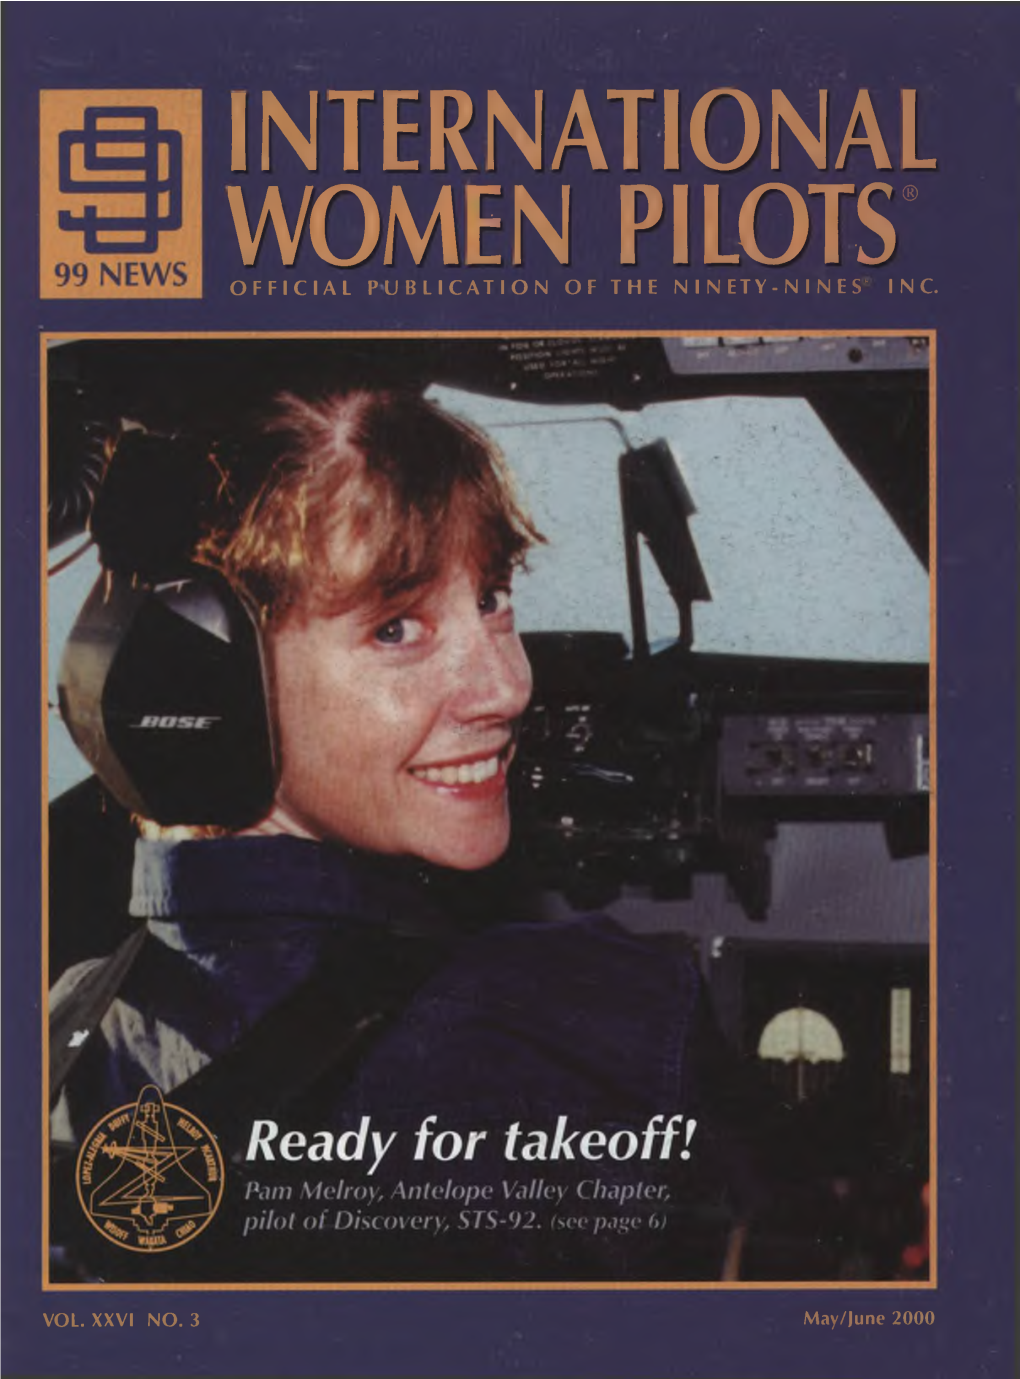 International Women Pilots' Official Publication of the Ninety-Nines" Inc